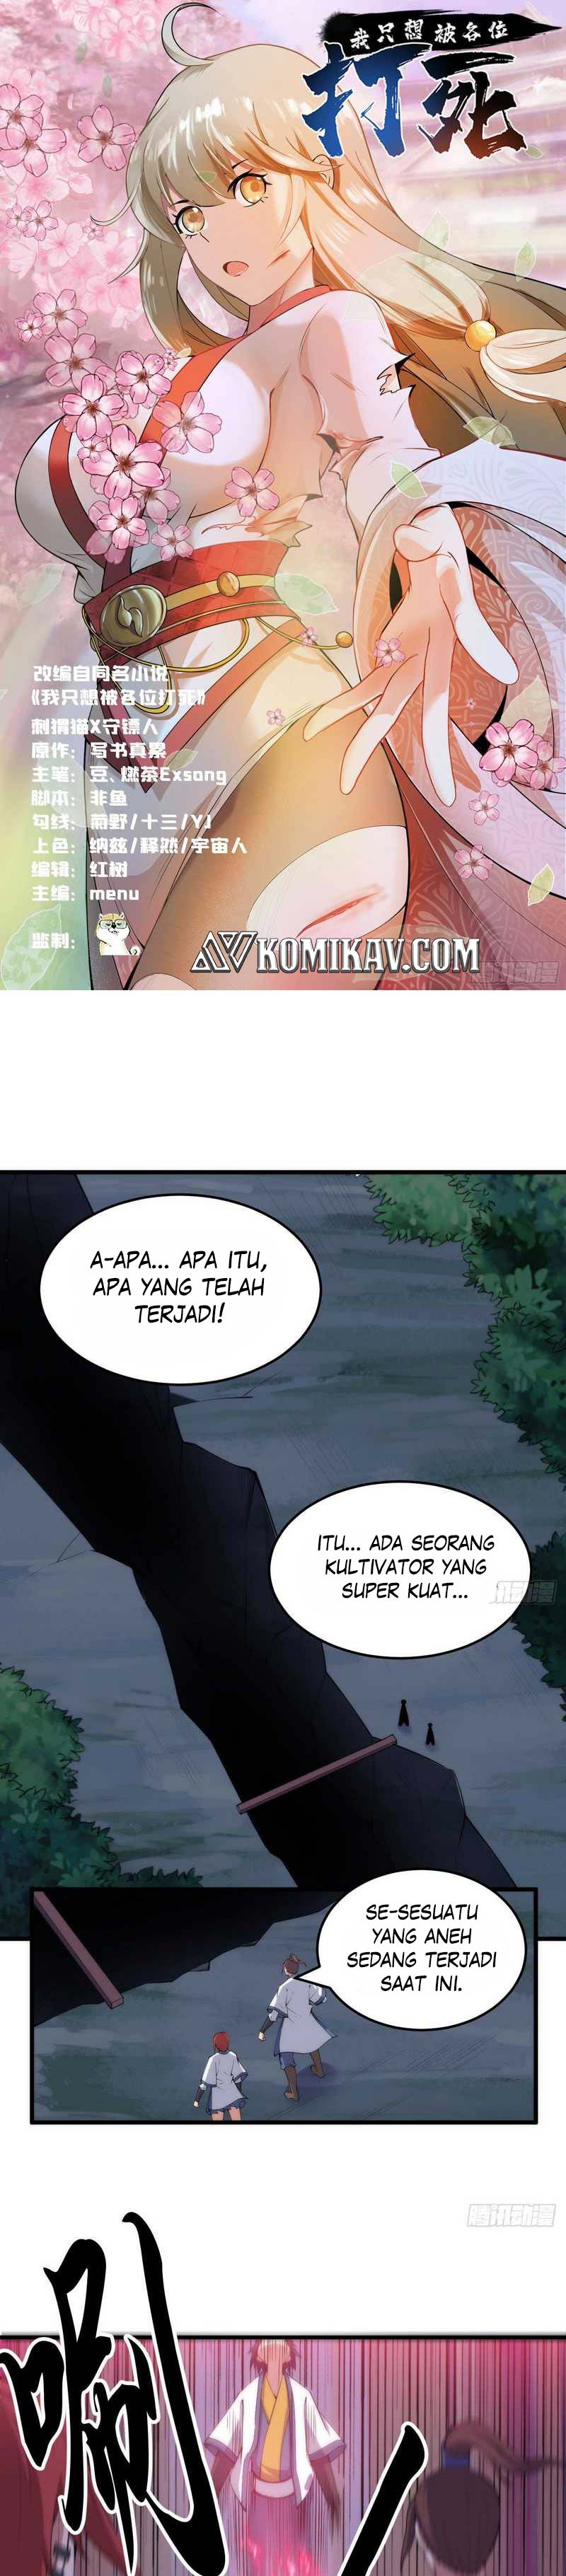 Dilarang COPAS - situs resmi www.mangacanblog.com - Komik i just want to be beaten to death by everyone 098 - chapter 98 99 Indonesia i just want to be beaten to death by everyone 098 - chapter 98 Terbaru 1|Baca Manga Komik Indonesia|Mangacan